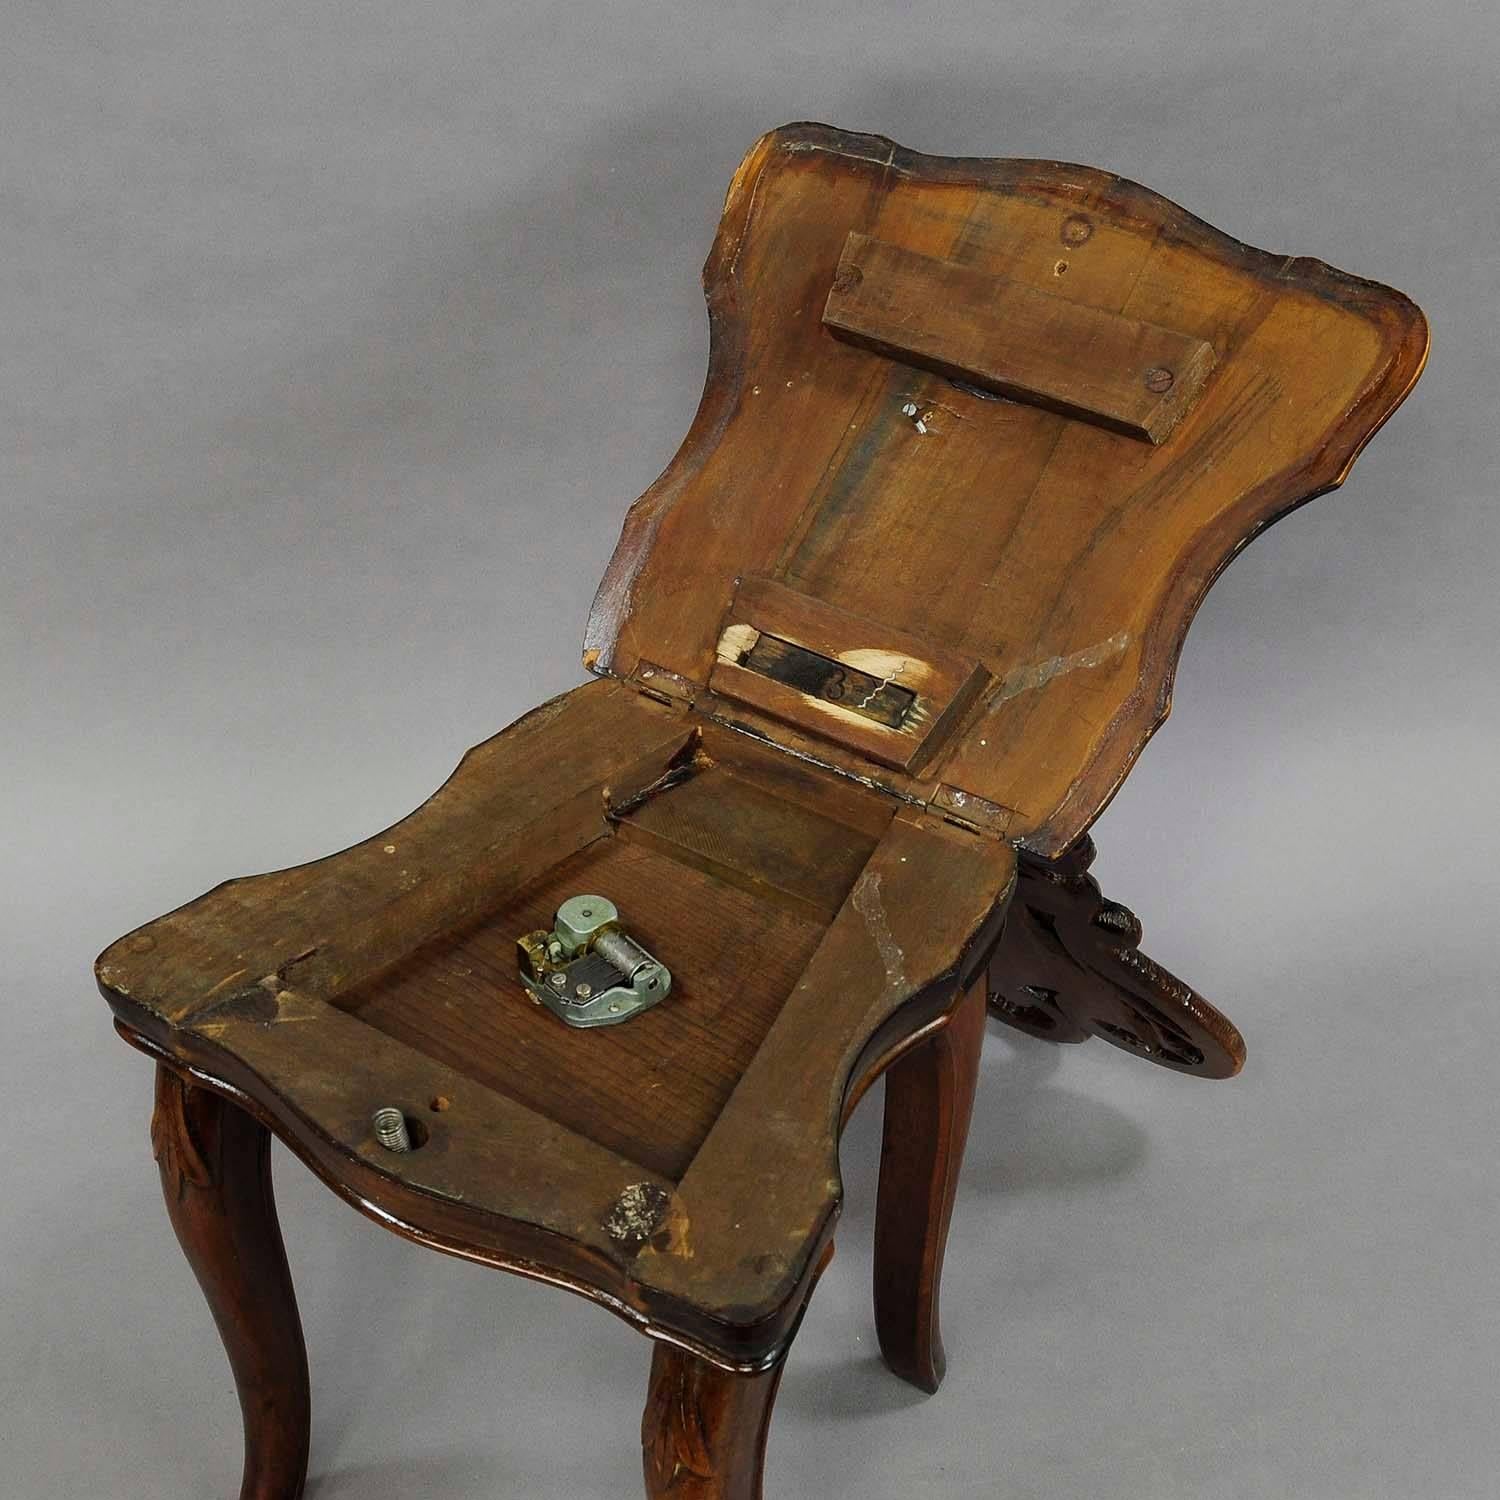 Nutwood Carved and Inlaid Walnut Children Chair with Musical Work, Swiss, 1900